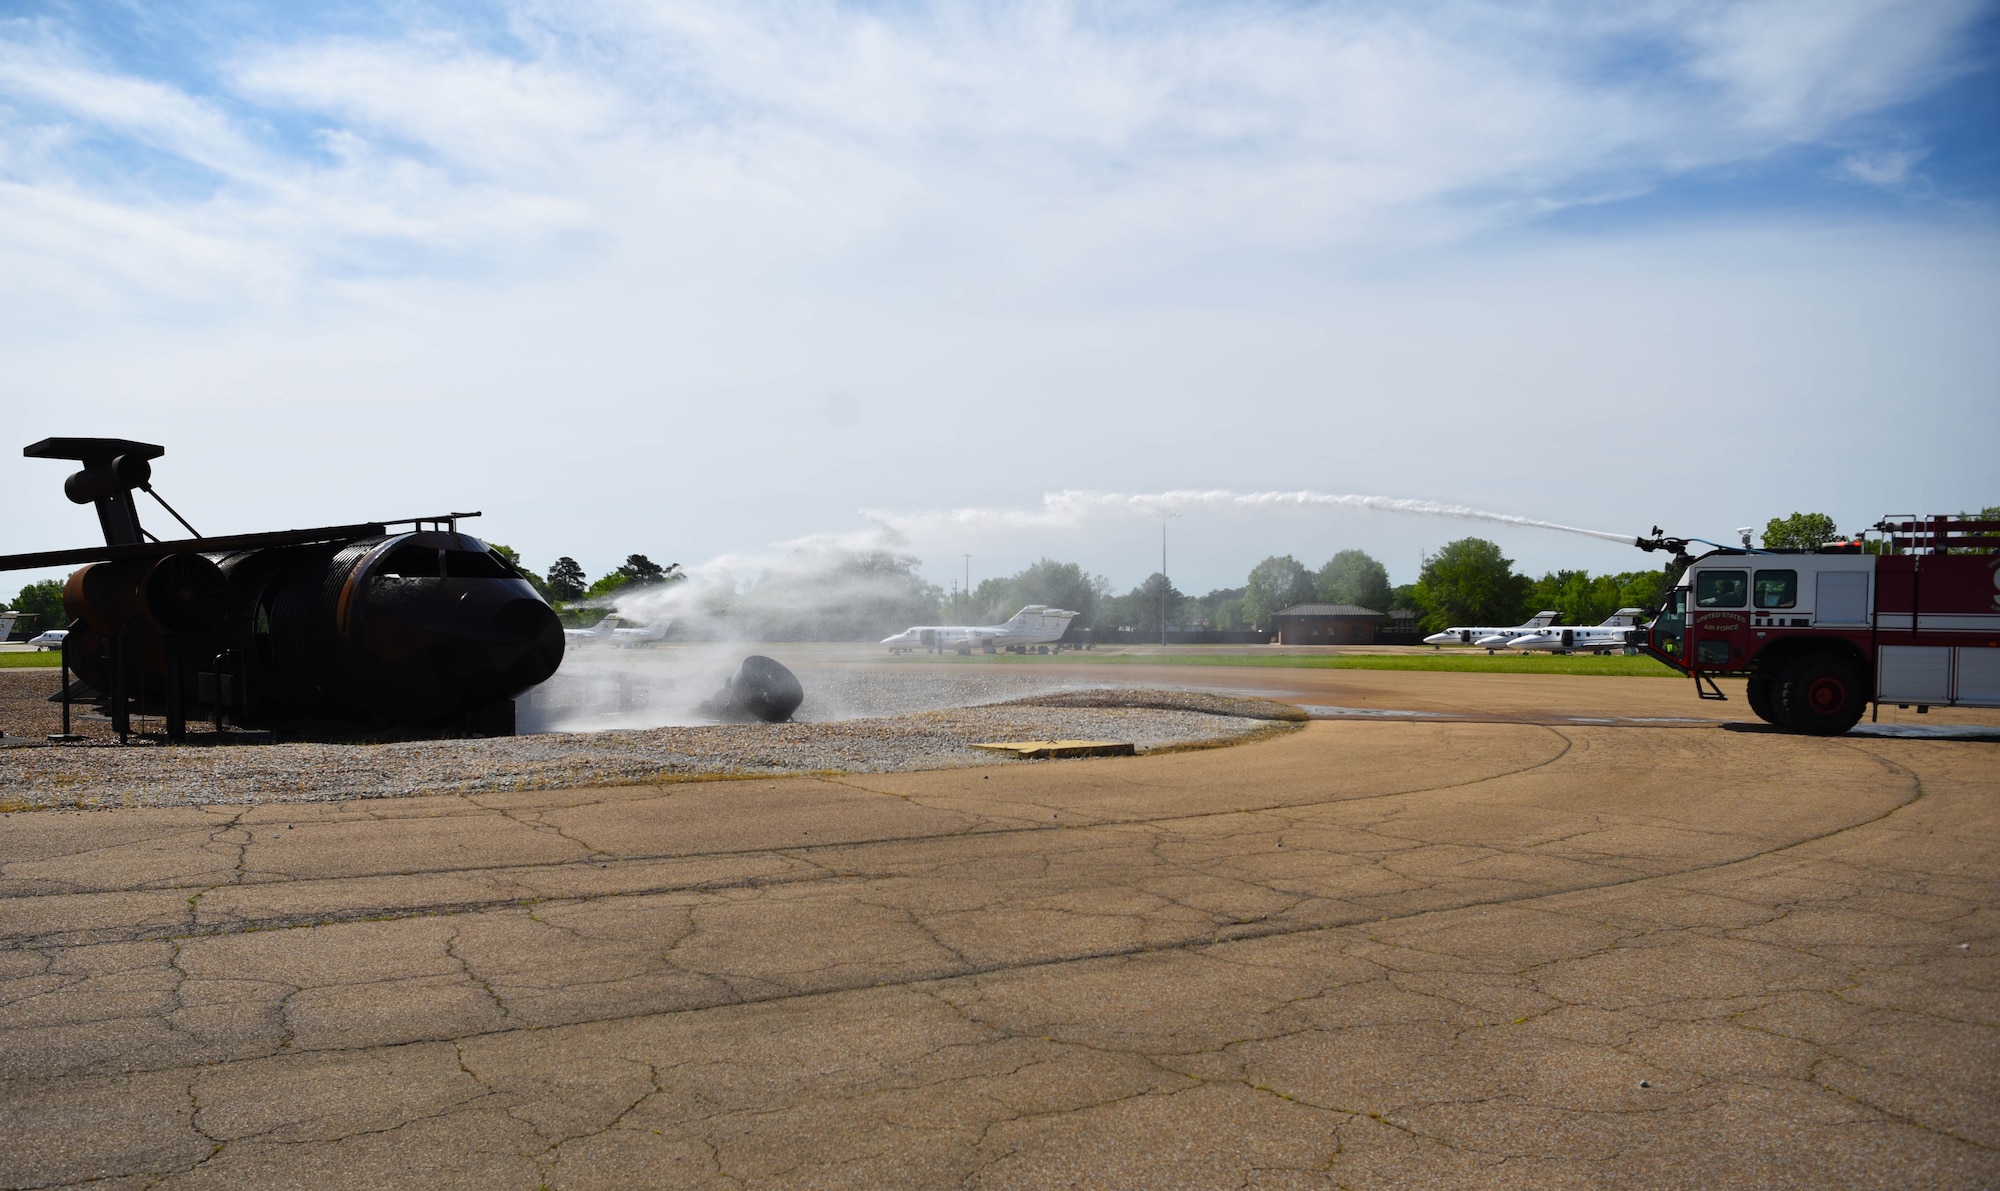 A Striker 1500 shoots out water during a training exercise April 10, 2020, on Columbus Air Force Base, Miss. Training is a key departmental function that ensures the ability to provide effective emergency response for Columbus AFB Fire and Emergency Services. (U.S. Air Force photo by Airman 1st Class Jake Jacobsen)